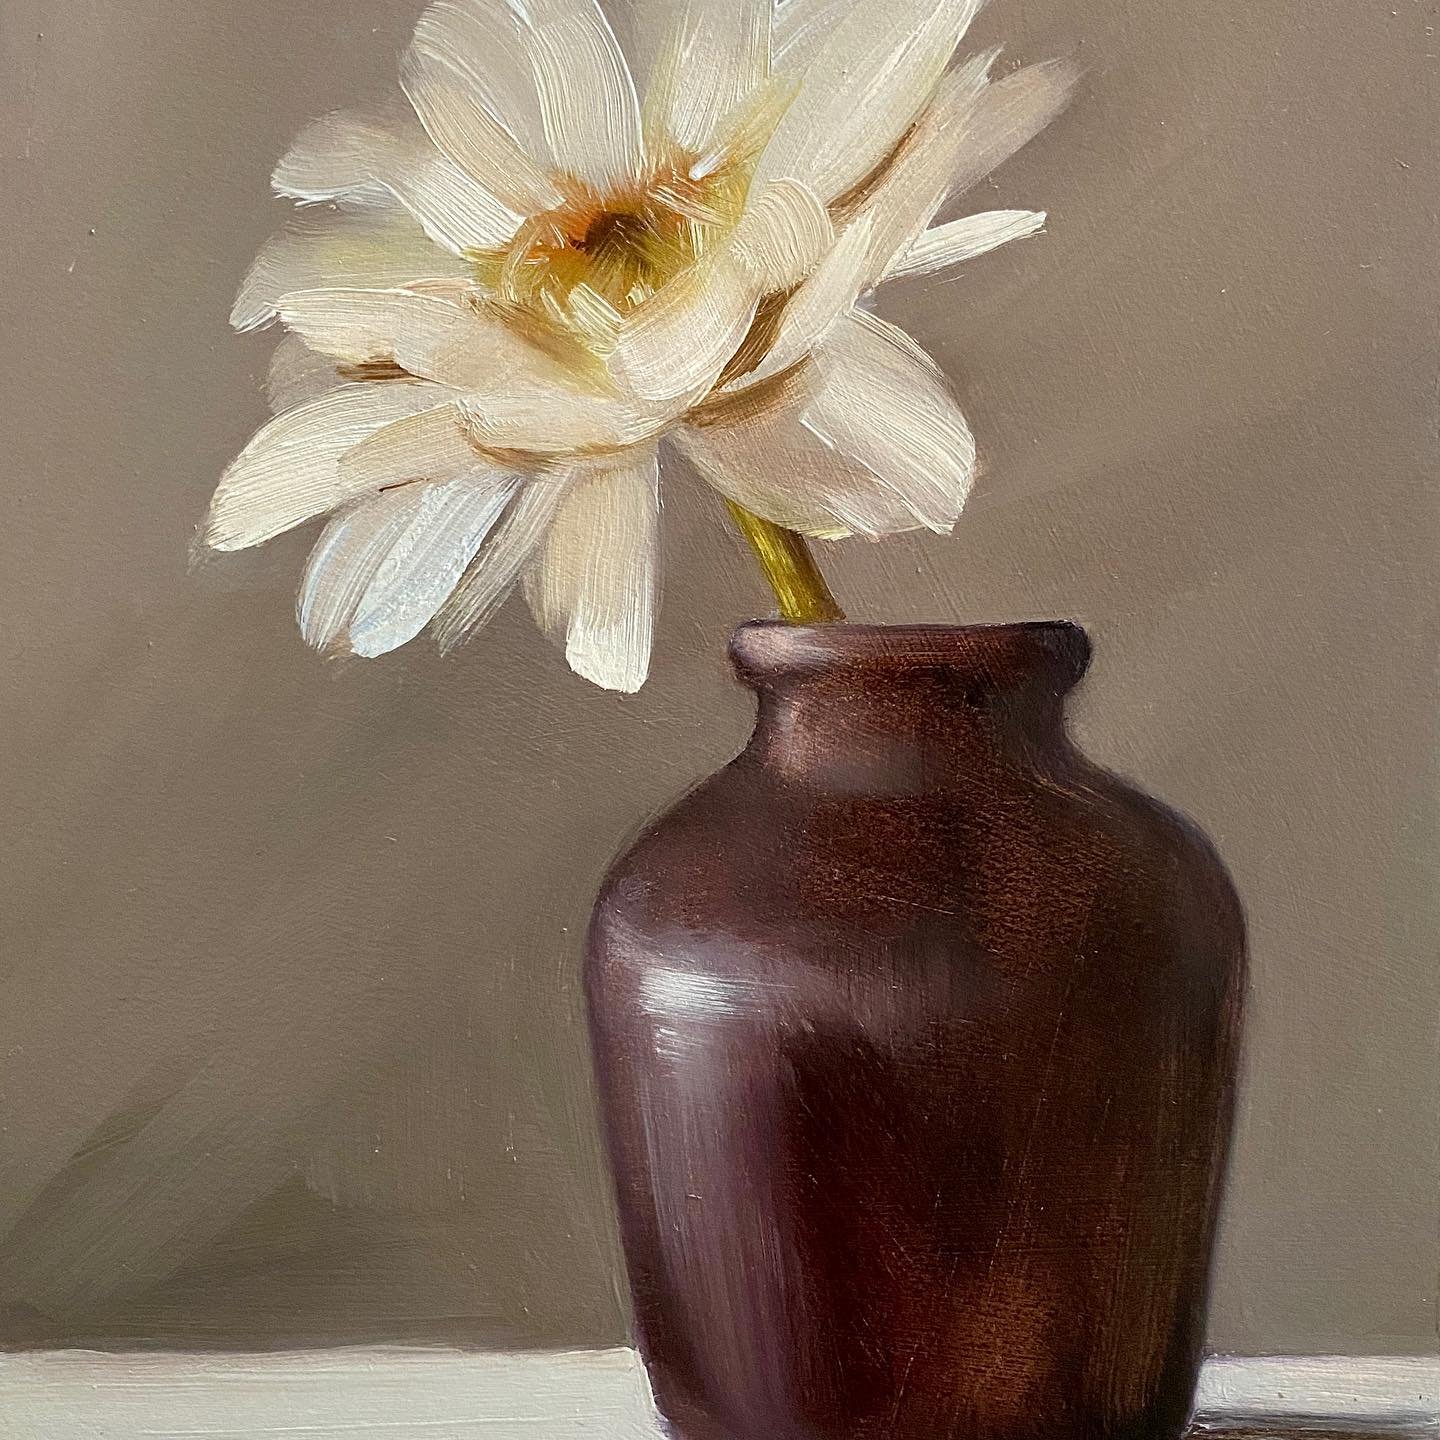 🔴SOLD &lsquo;white flower&rsquo; oil on paper.
So happy to see this sold last night.
Thank you Temp200 and the art collector.

You can check out my other work &lsquo;Lemon&rsquo; exhibiting at @tempgallery.au

Exhibition dates 24 April - 10 May
Thur